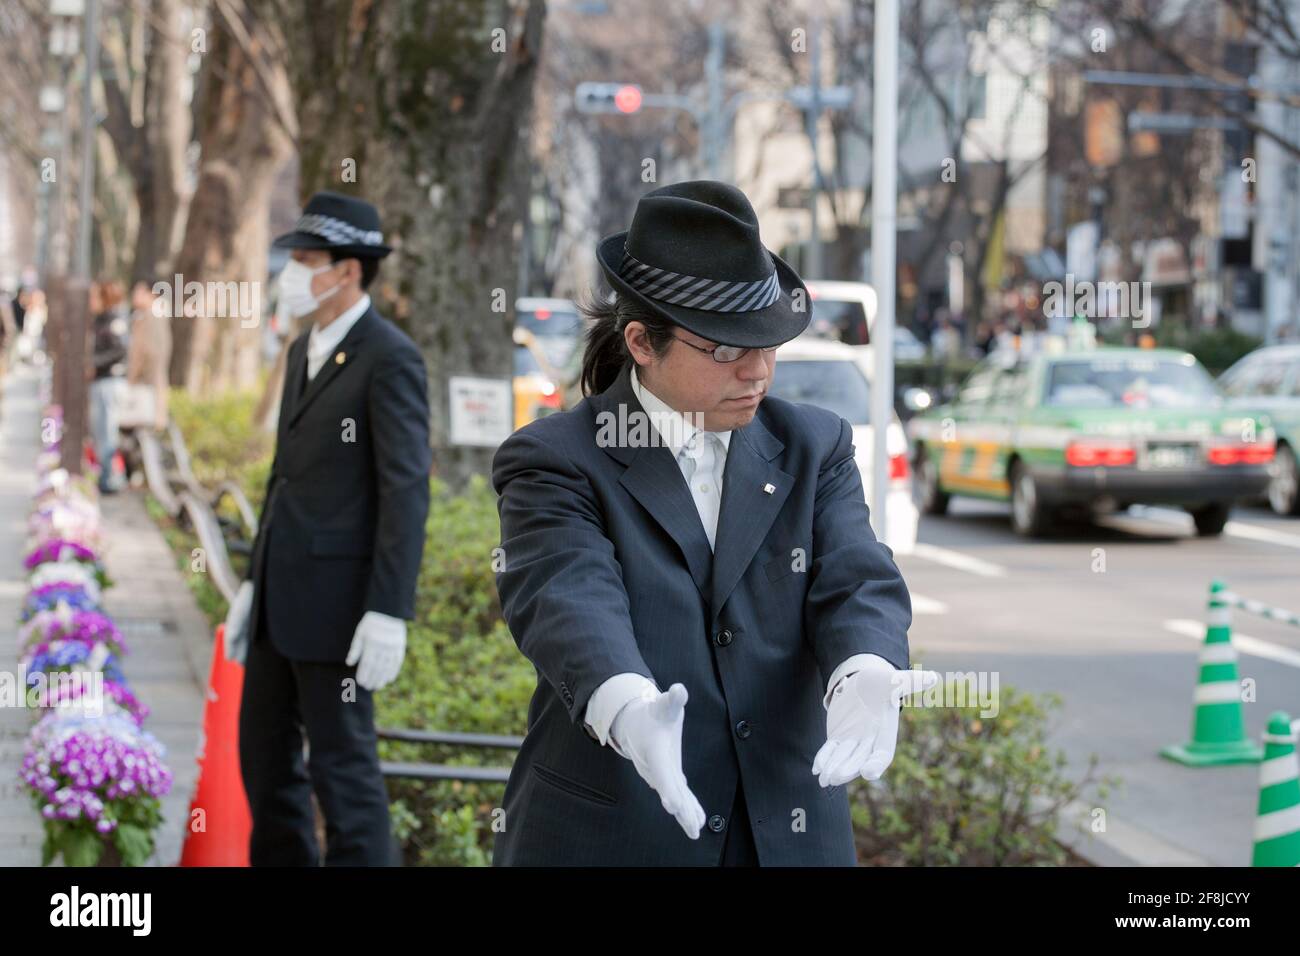 Japanese car parking attendant dressed in trilby hat guides a parker, Aoyama, Tokyo, Japan Stock Photo